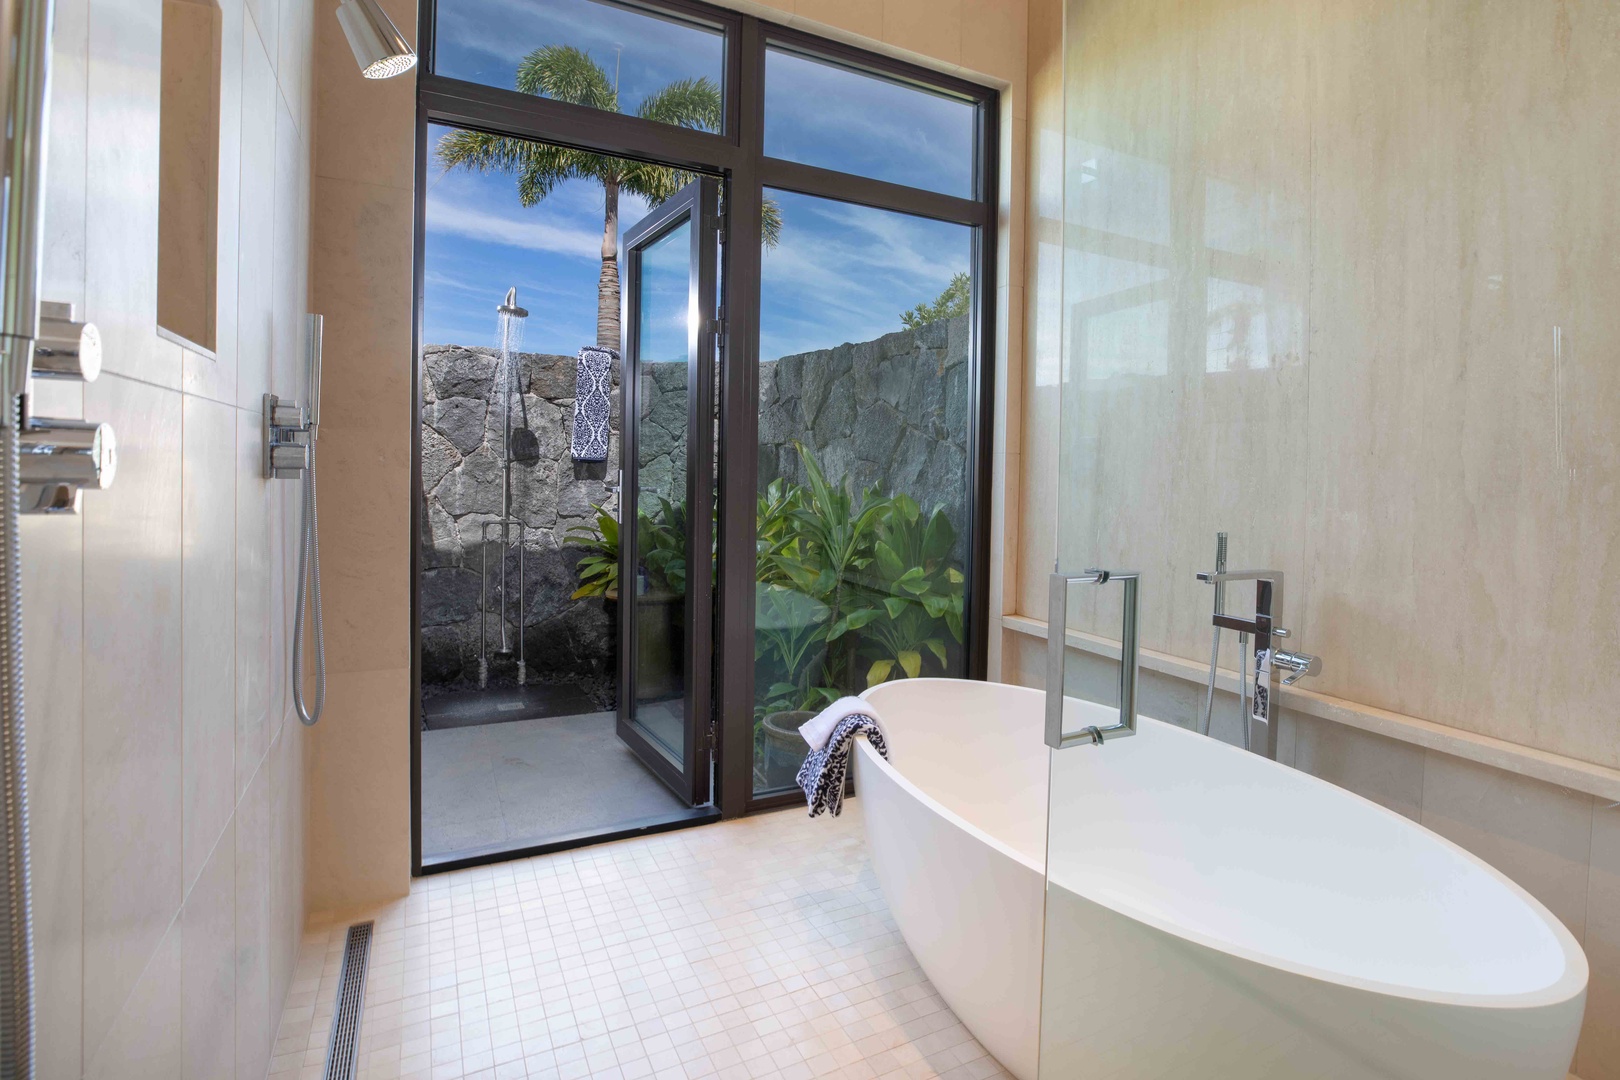 Kamuela Vacation Rentals, Hapuna Estates #8 - Master Suite 1 with walk in shower, soaking tub, and out door shower area